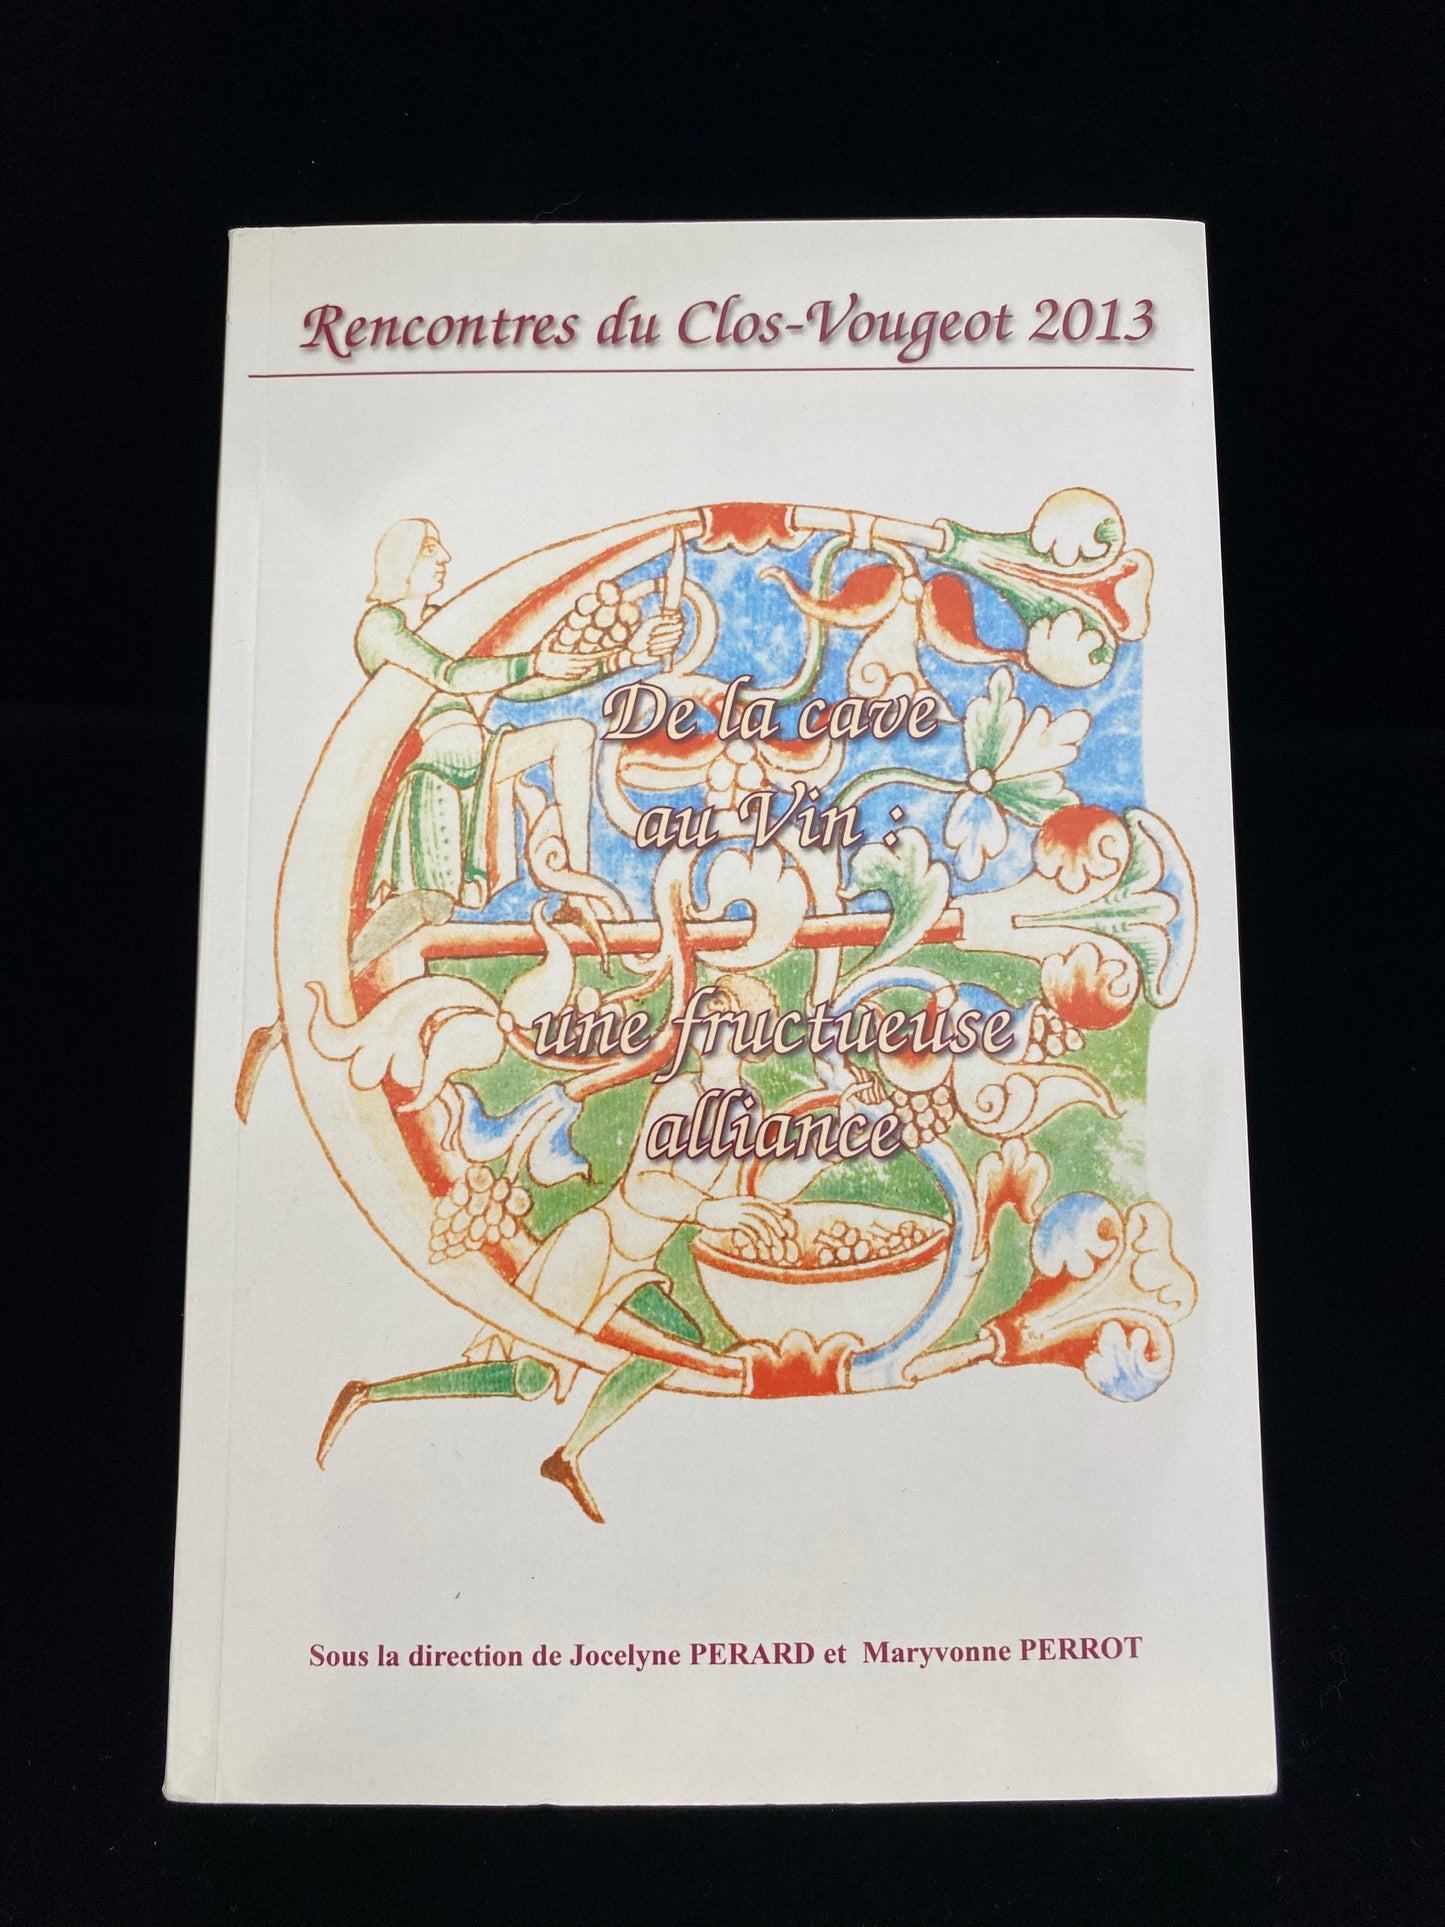 Rencontres du Clos-Vougeot – “From the cellar to the wine: a fruitful alliance” (2013)